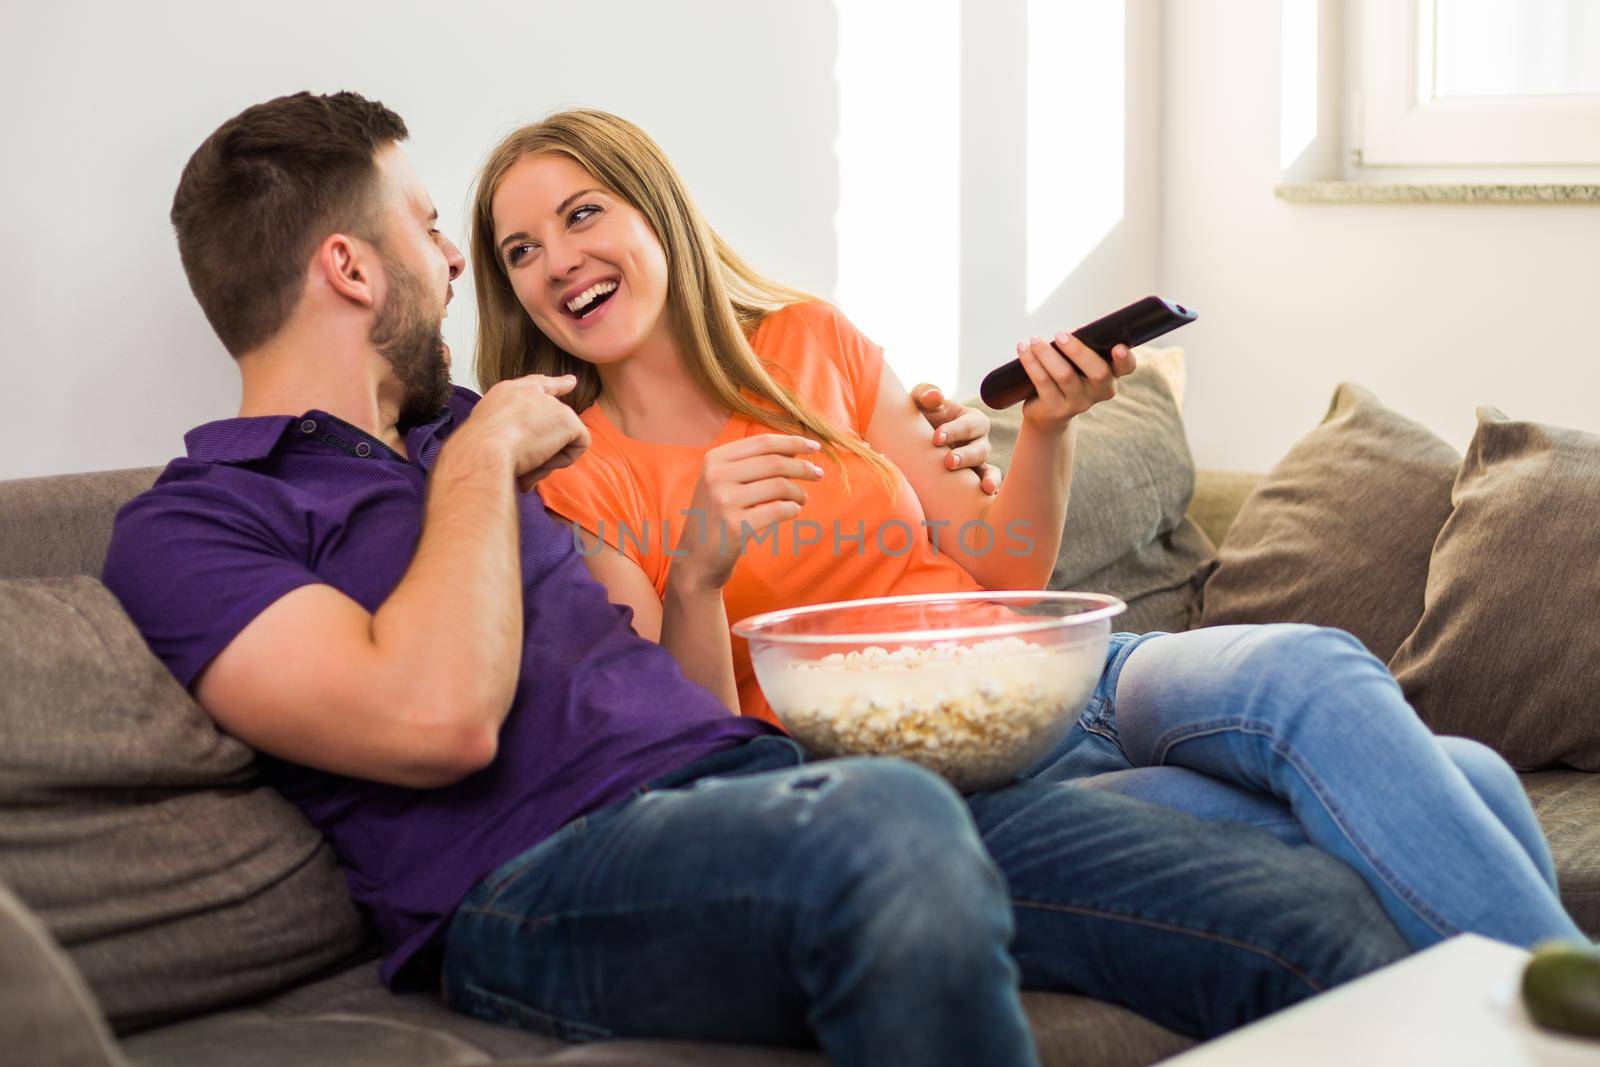 Happy couple enjoy watching tv, eating popcorn and spending time together at their home.